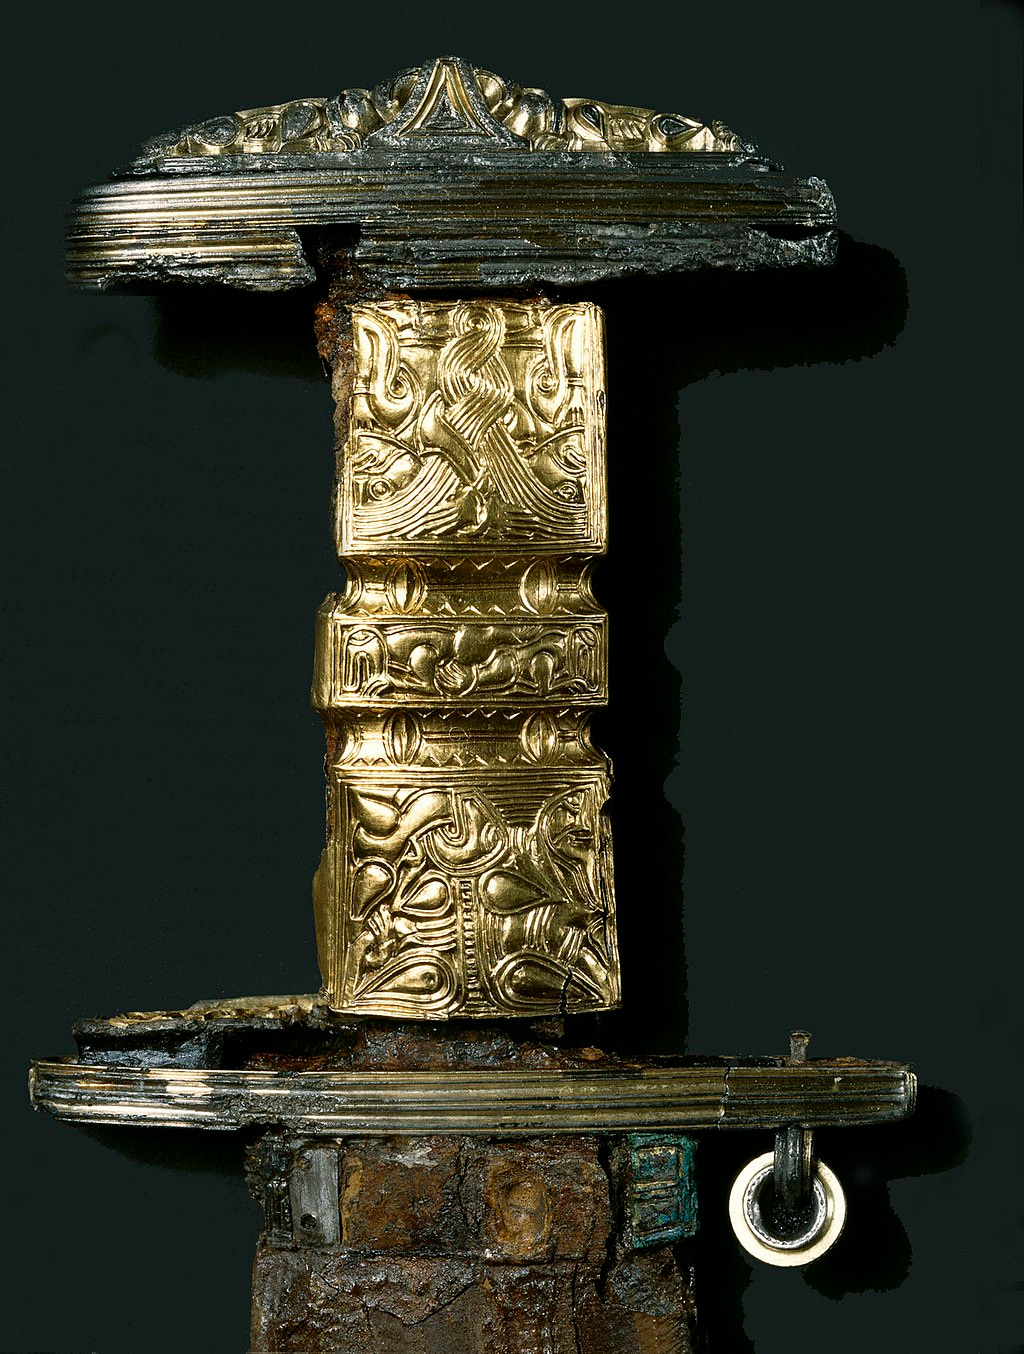 The Snartemo sword with crossguard-mounted ring